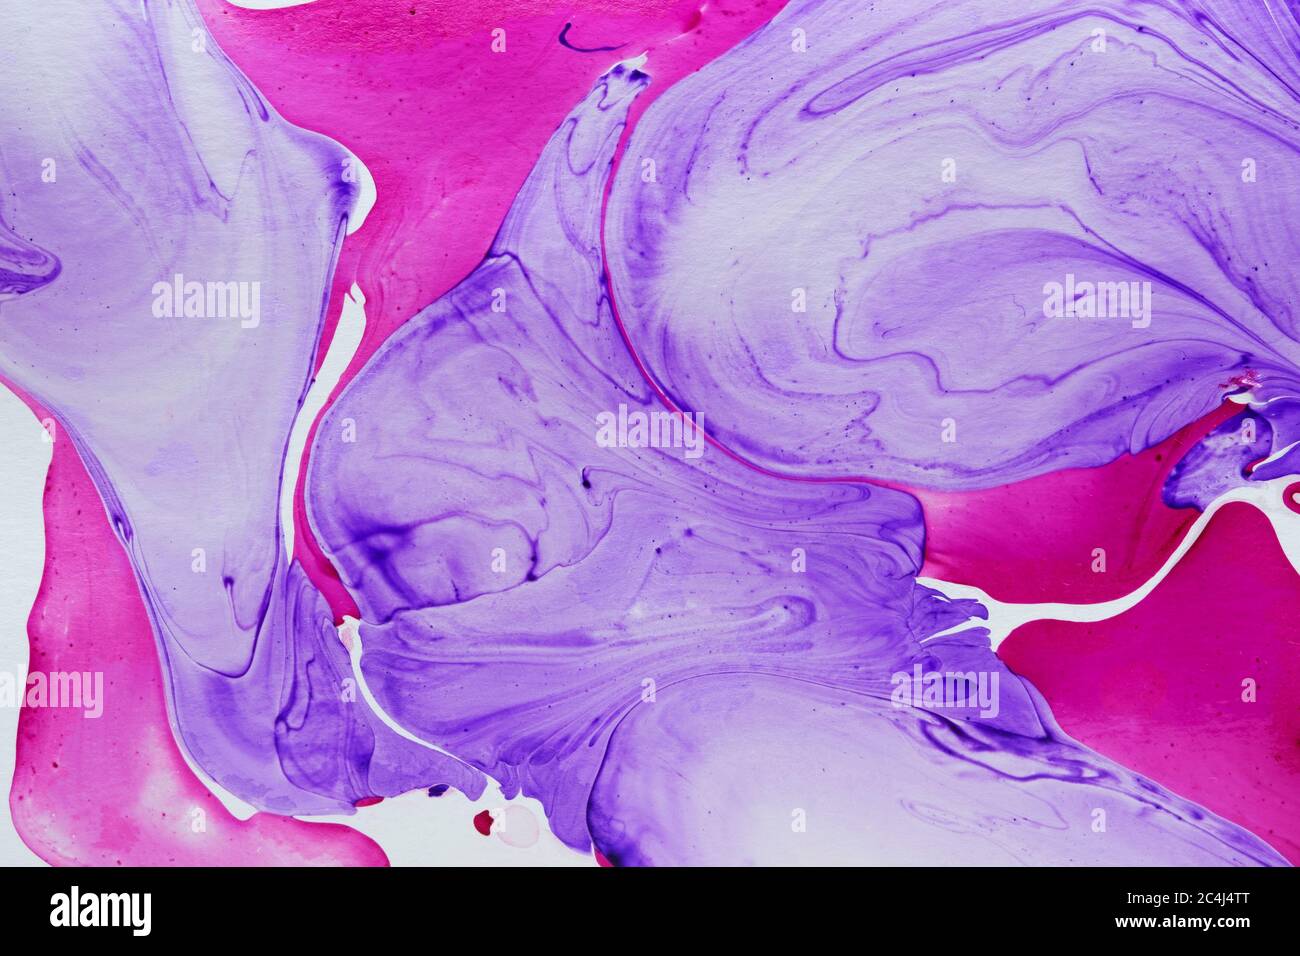 Abstract fluid marbleized effect or background pattern with free flowing swirls of purple and magenta on white in full frame Stock Photo